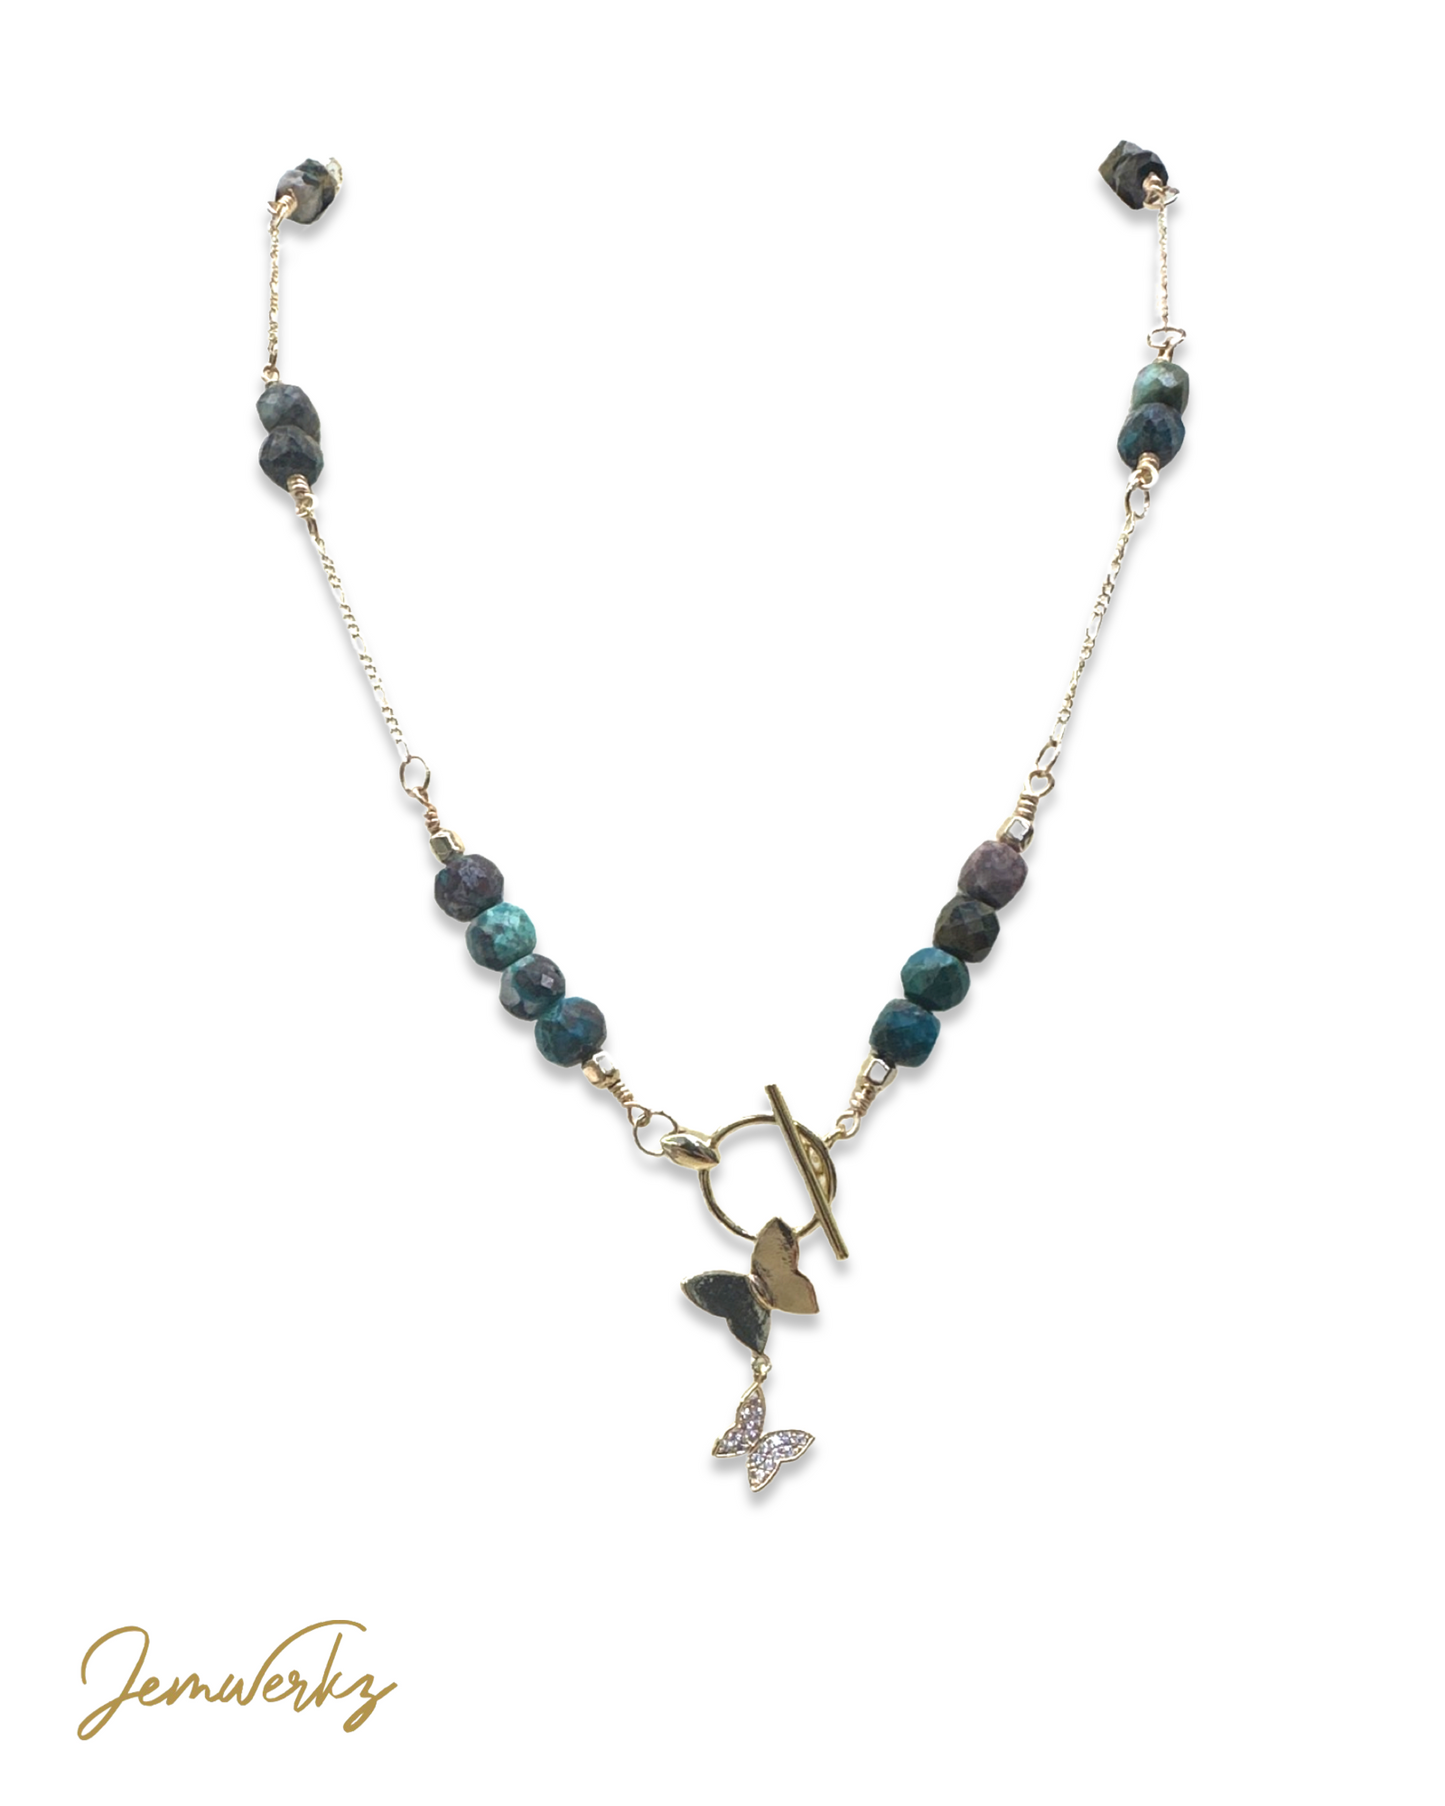 PARADISE - Faceted Phoenix Stone Necklace with Butterfly Clasp